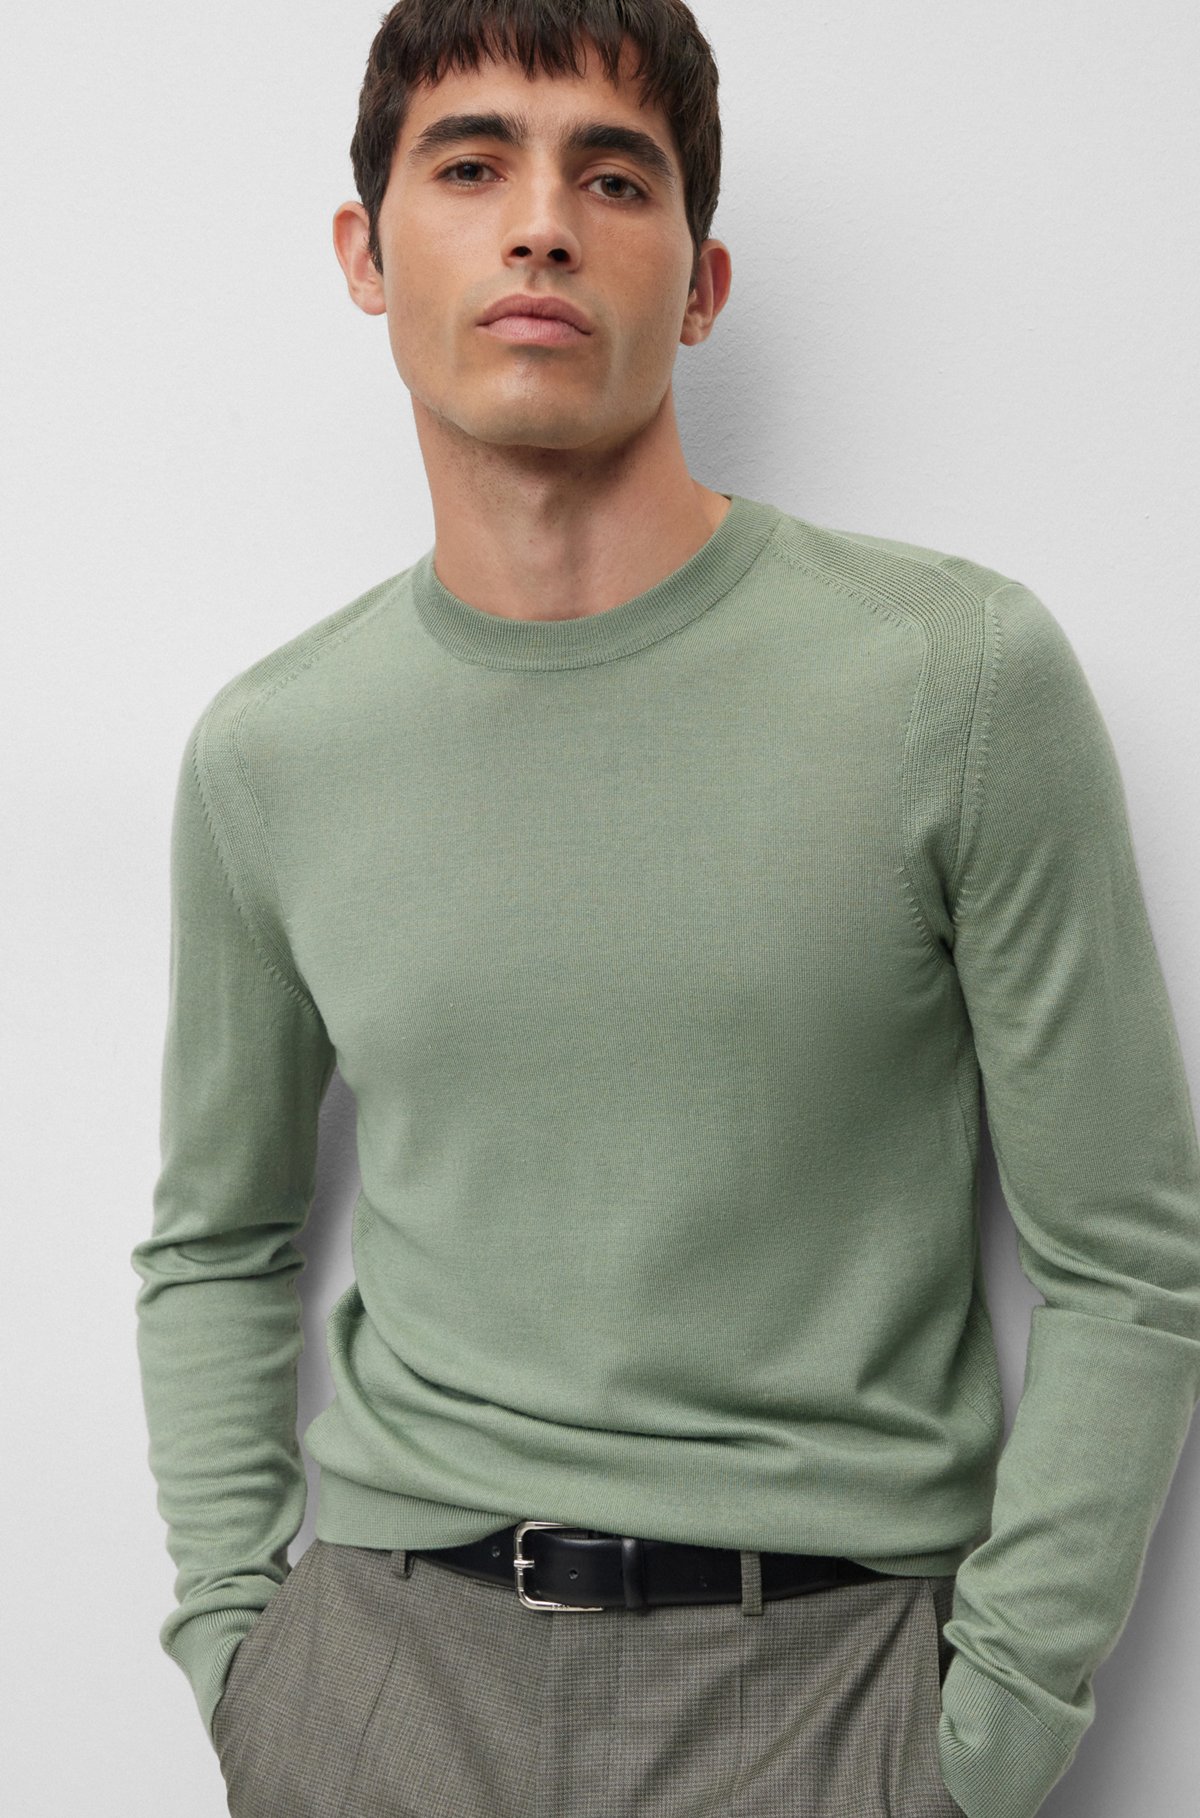 Regular-fit sweater in wool, silk and cashmere, Green